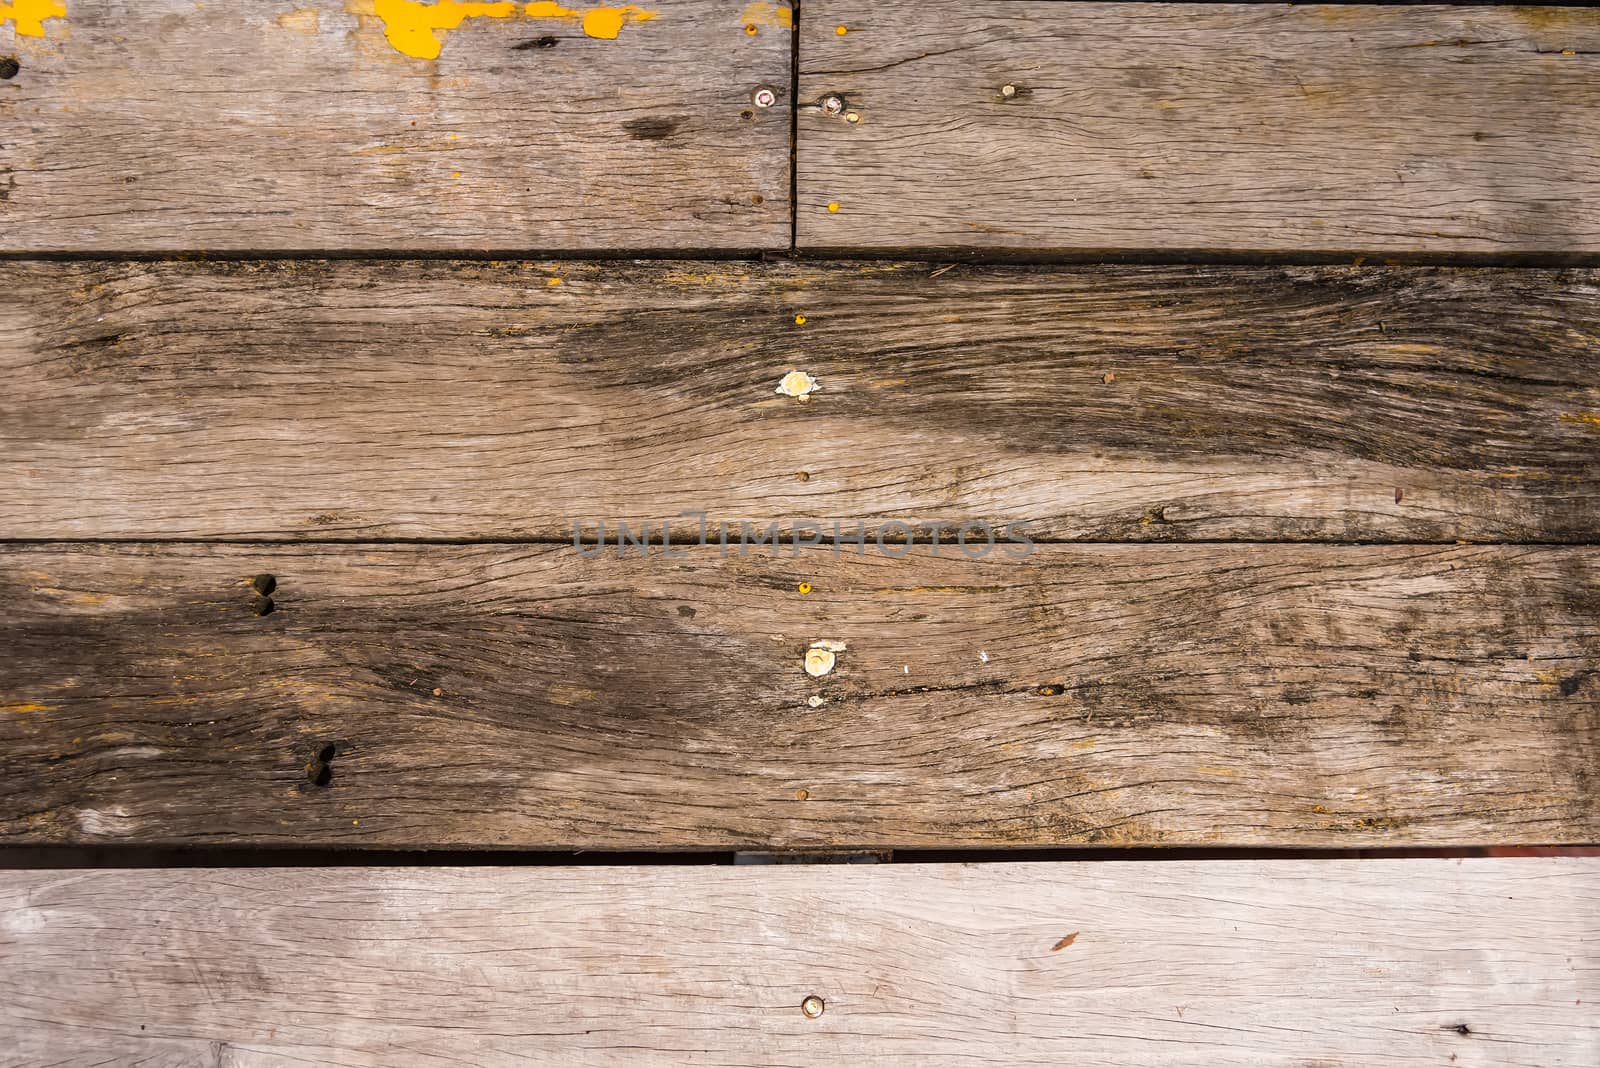 The old wood texture with natural patterns background with rusty nails. wooden texture. surface vintage tone.wooden texture background